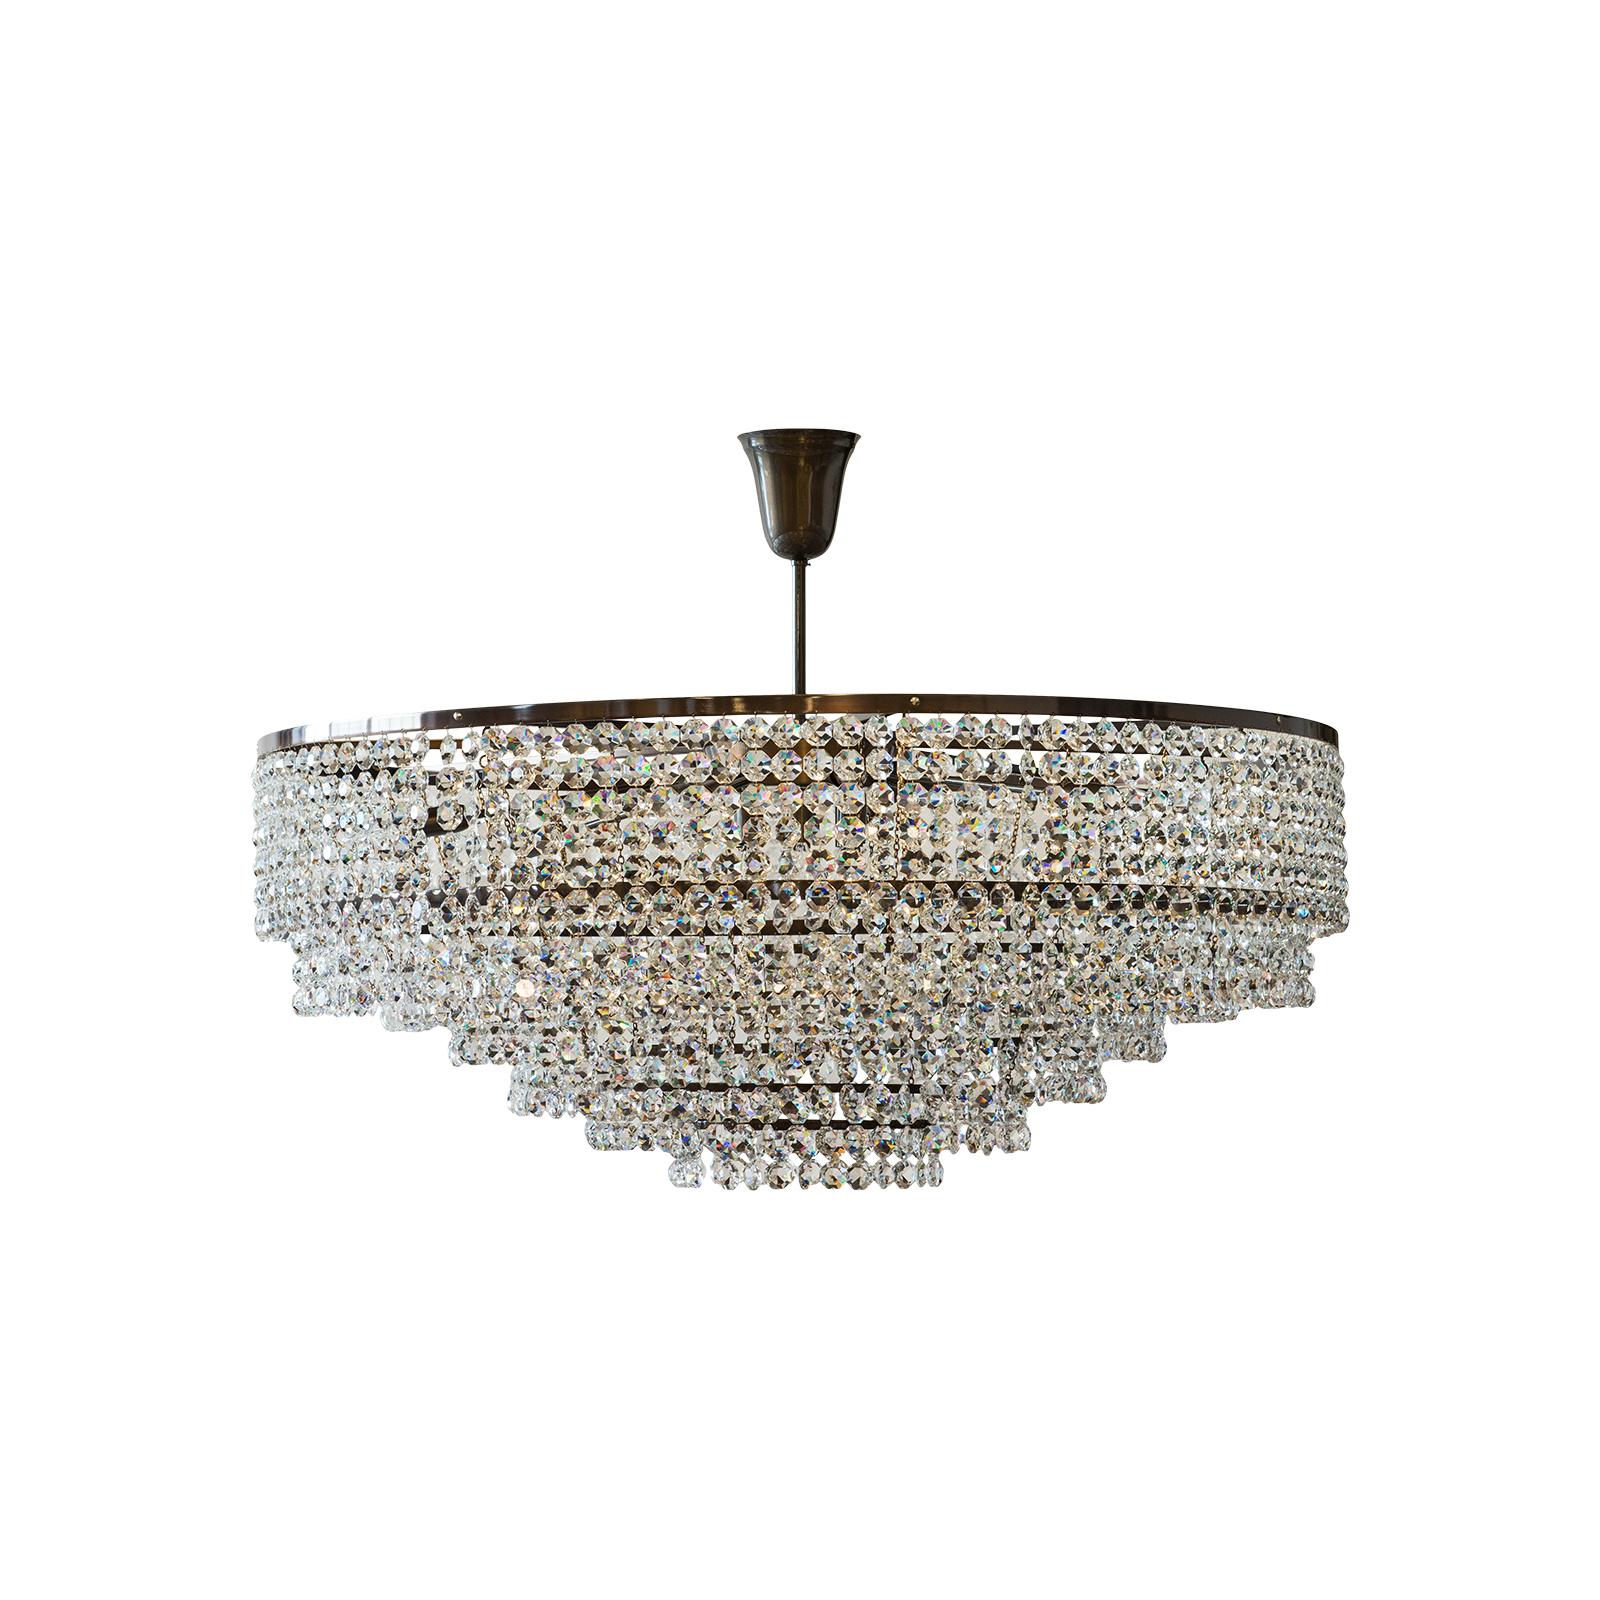 Mid-Century Modern Big Crystal Chandelier in the Style of the 1960ies Re Edition For Sale